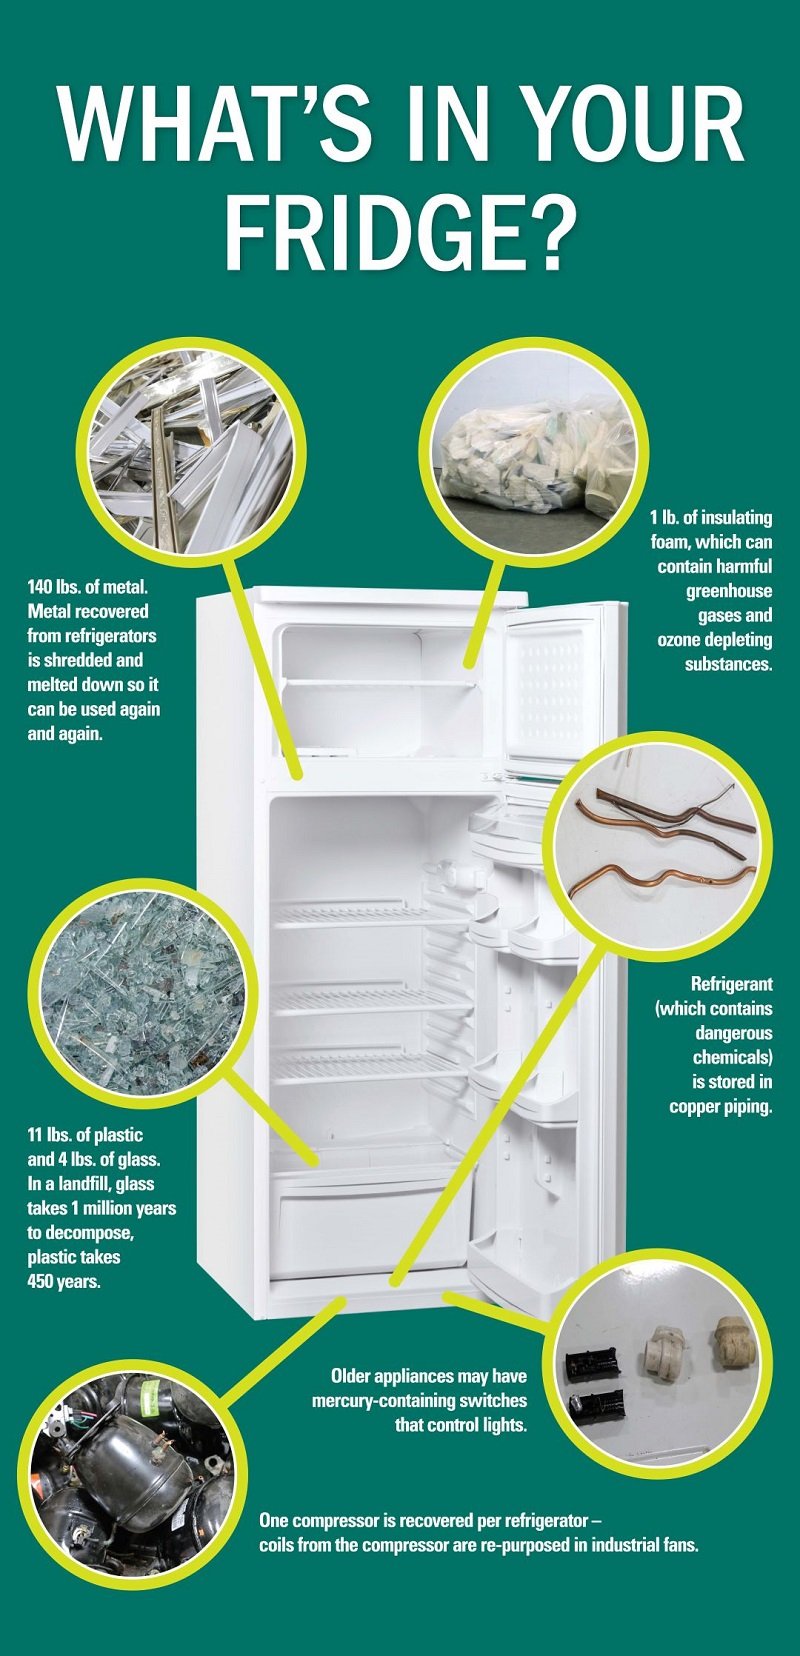 whats in your fridge graphic